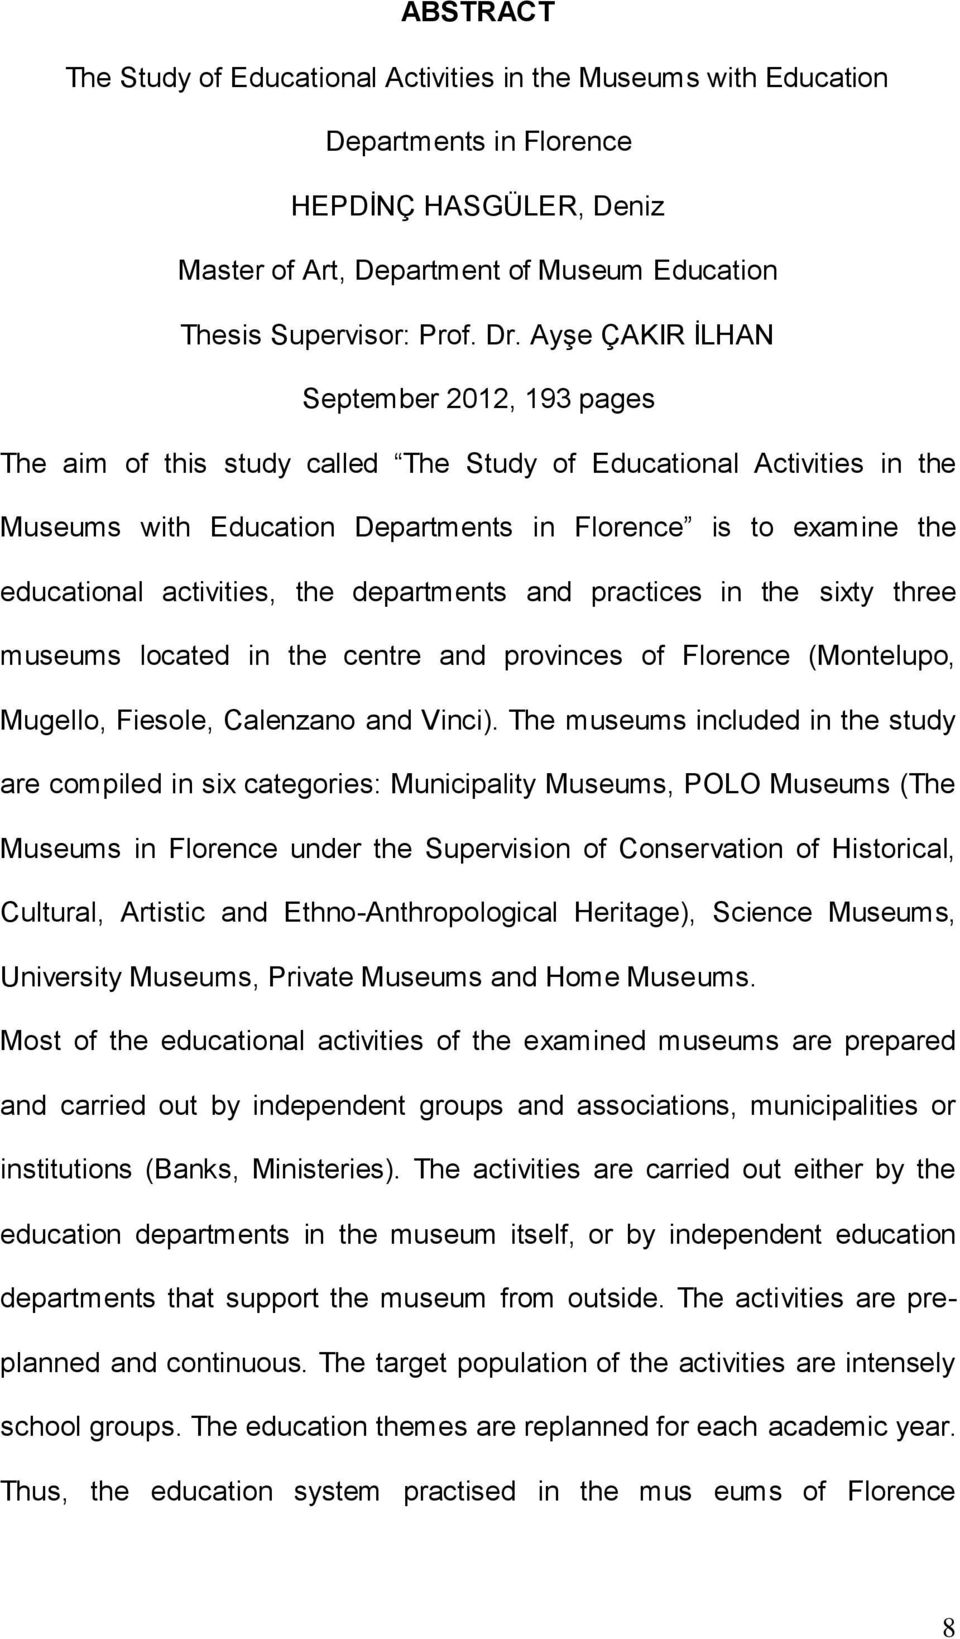 activities, the departments and practices in the sity three museums located in the centre and provinces of Florence (Montelupo, Mugello, Fiesole, Calenzano and Vinci).